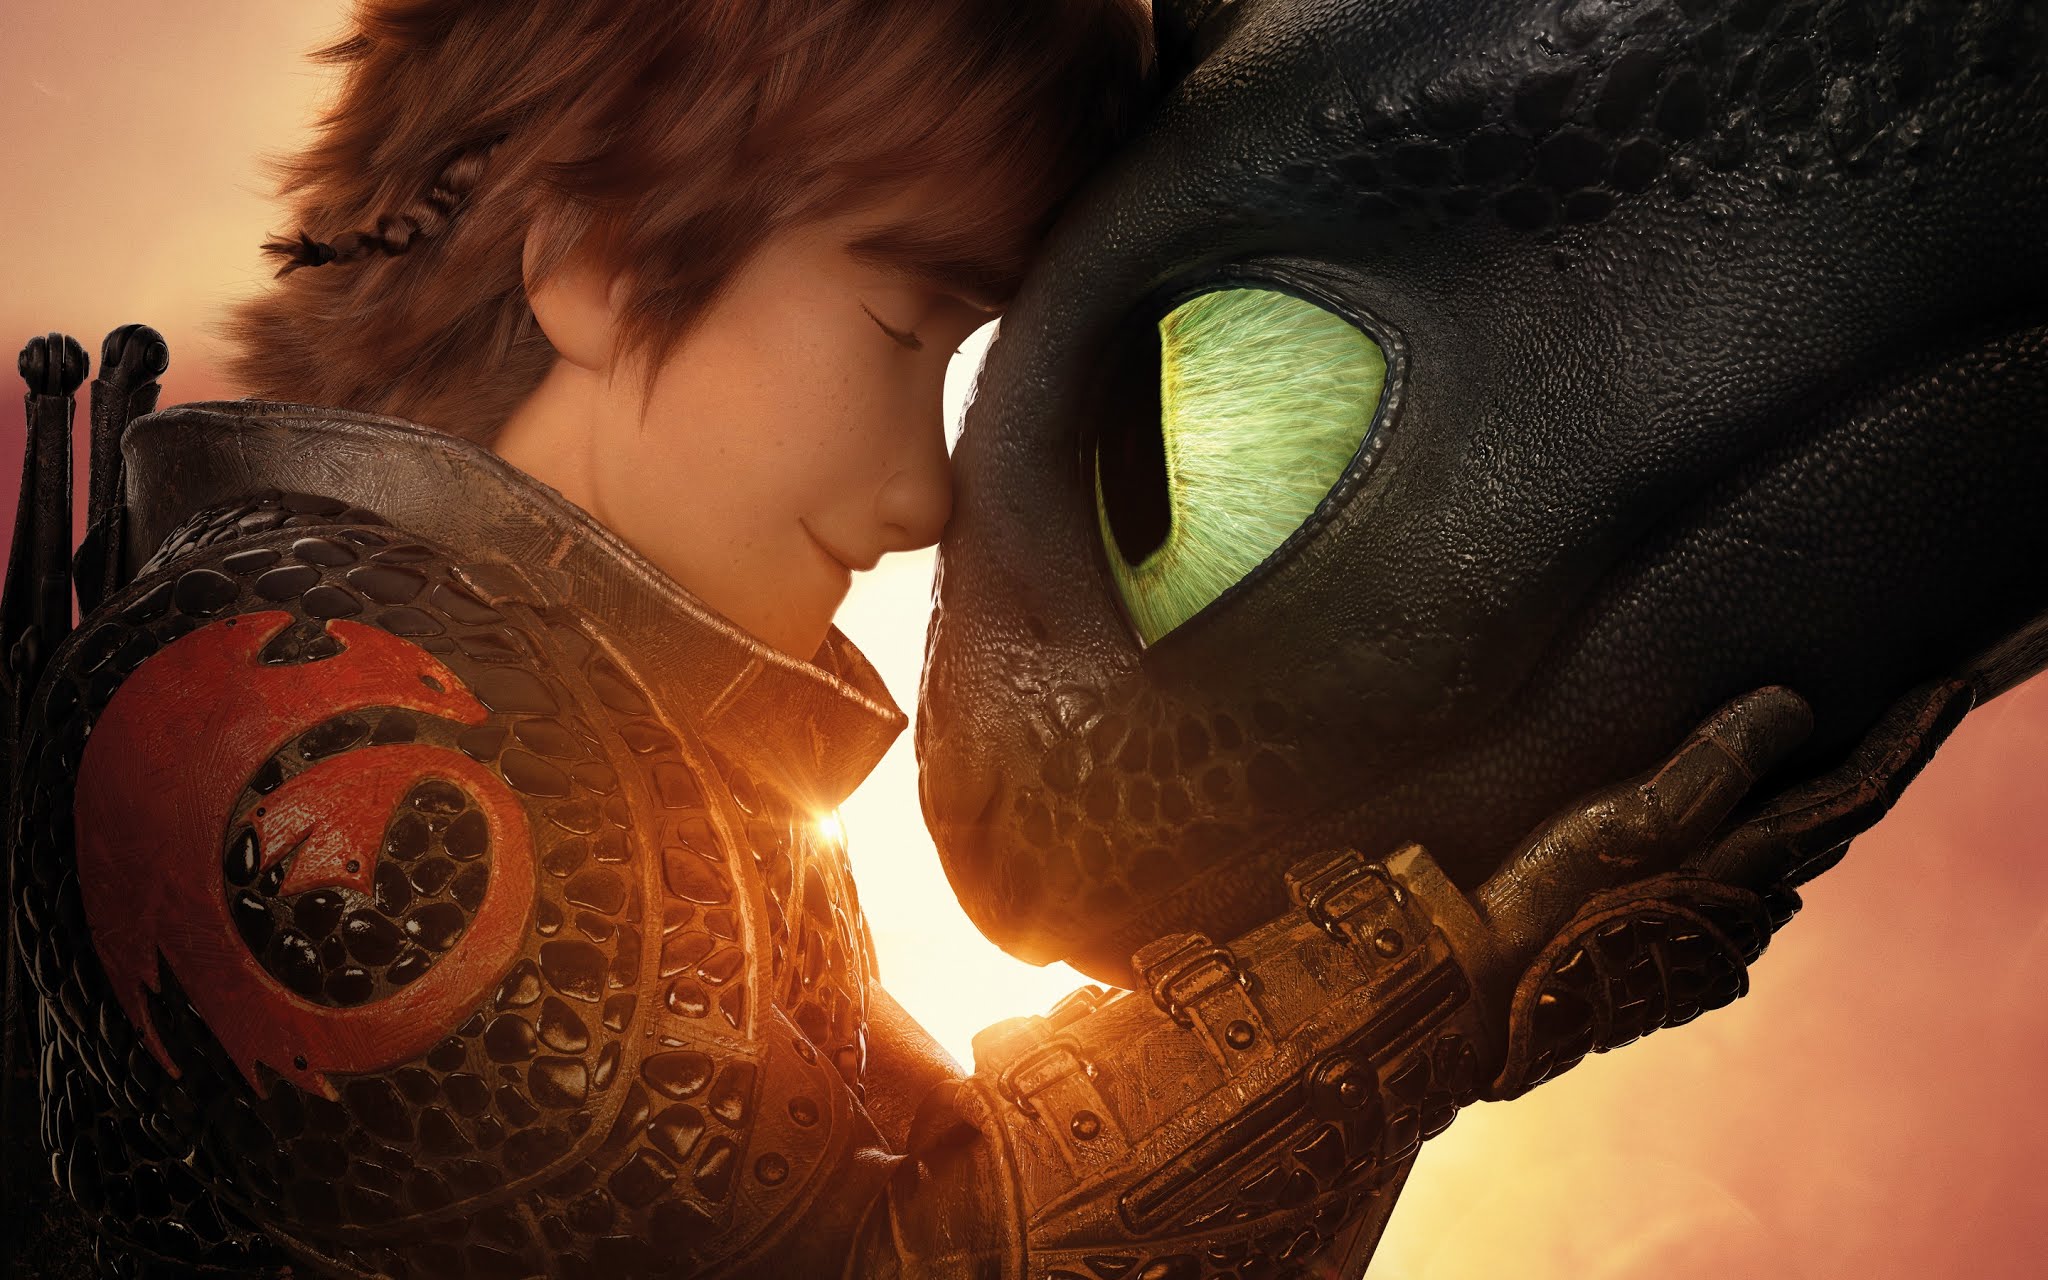 hiccup-2880x1800-night-fury-toothless-how-to-train-your-dragon-3-how-17057.jpg